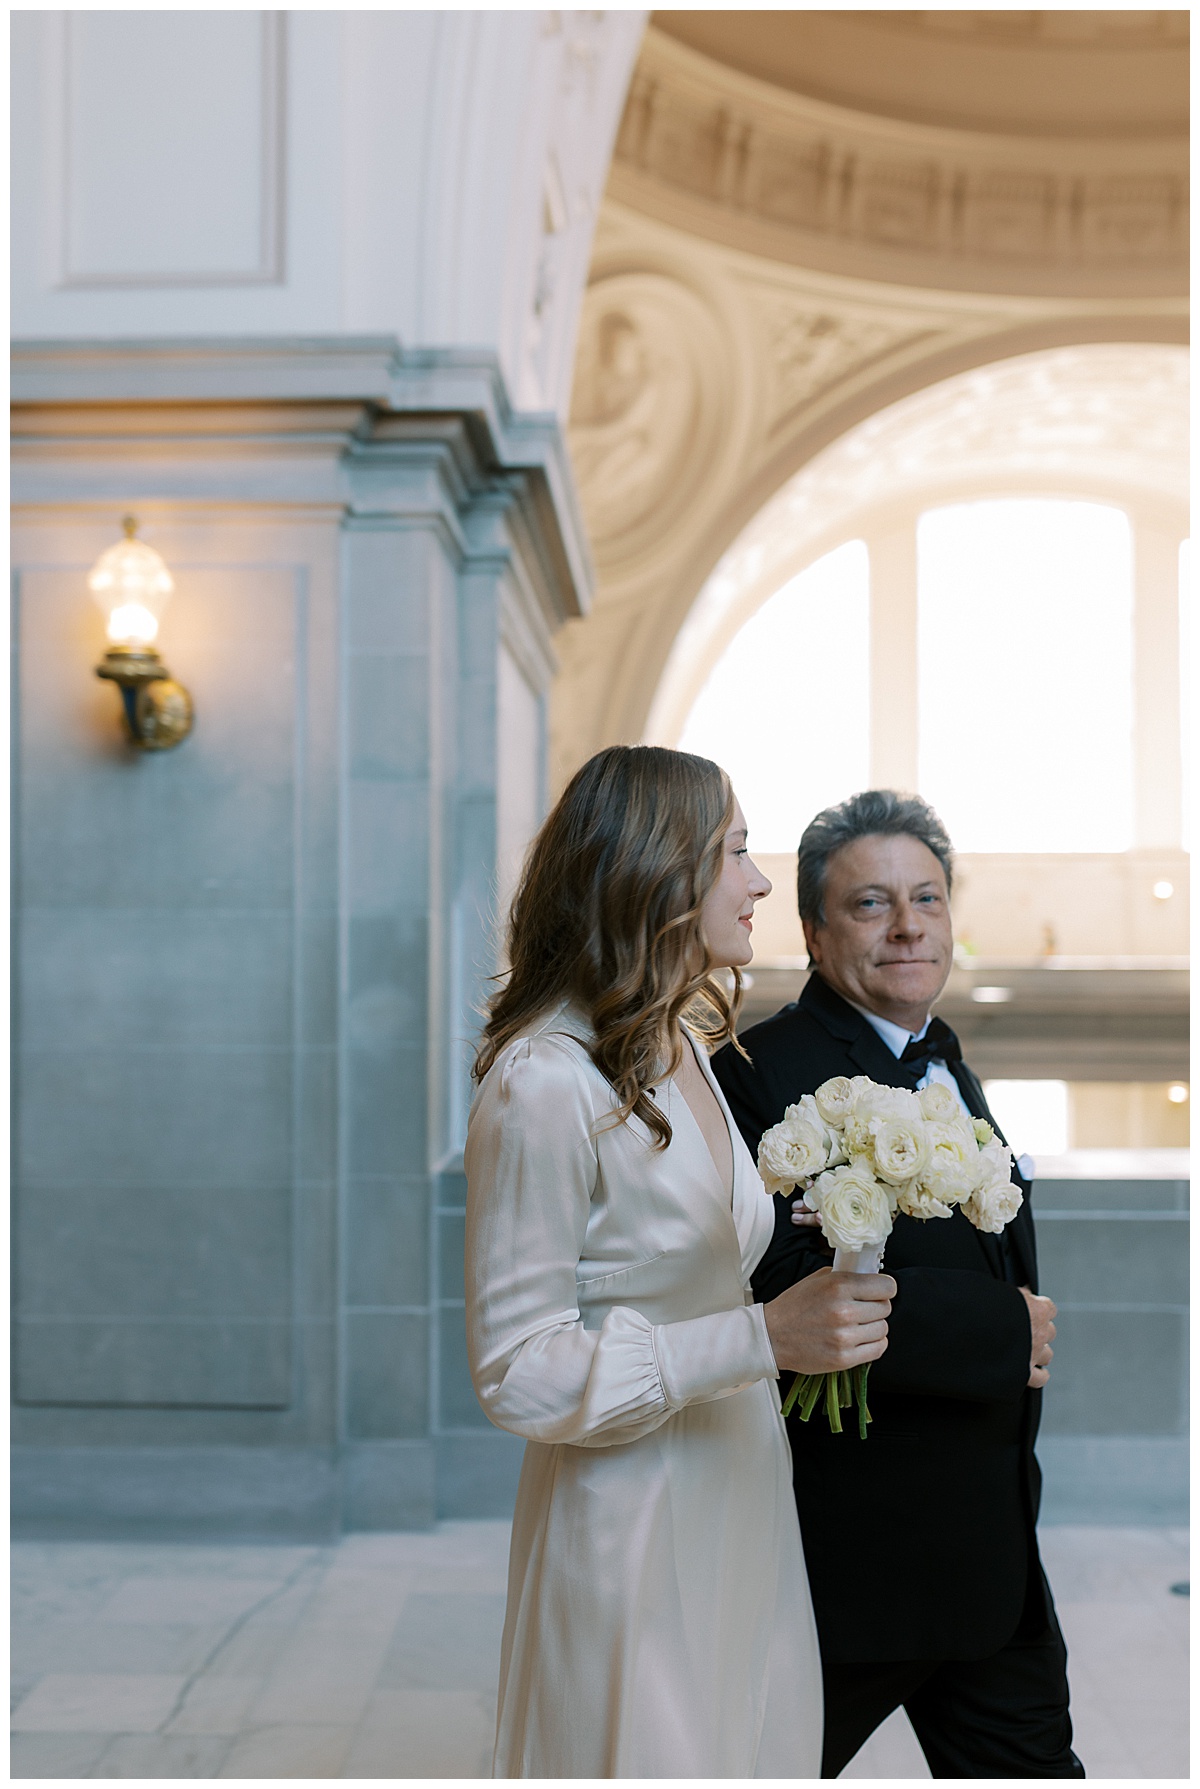 Caitlin and Guilherme's glamorous SF City Hall elopement ceremony